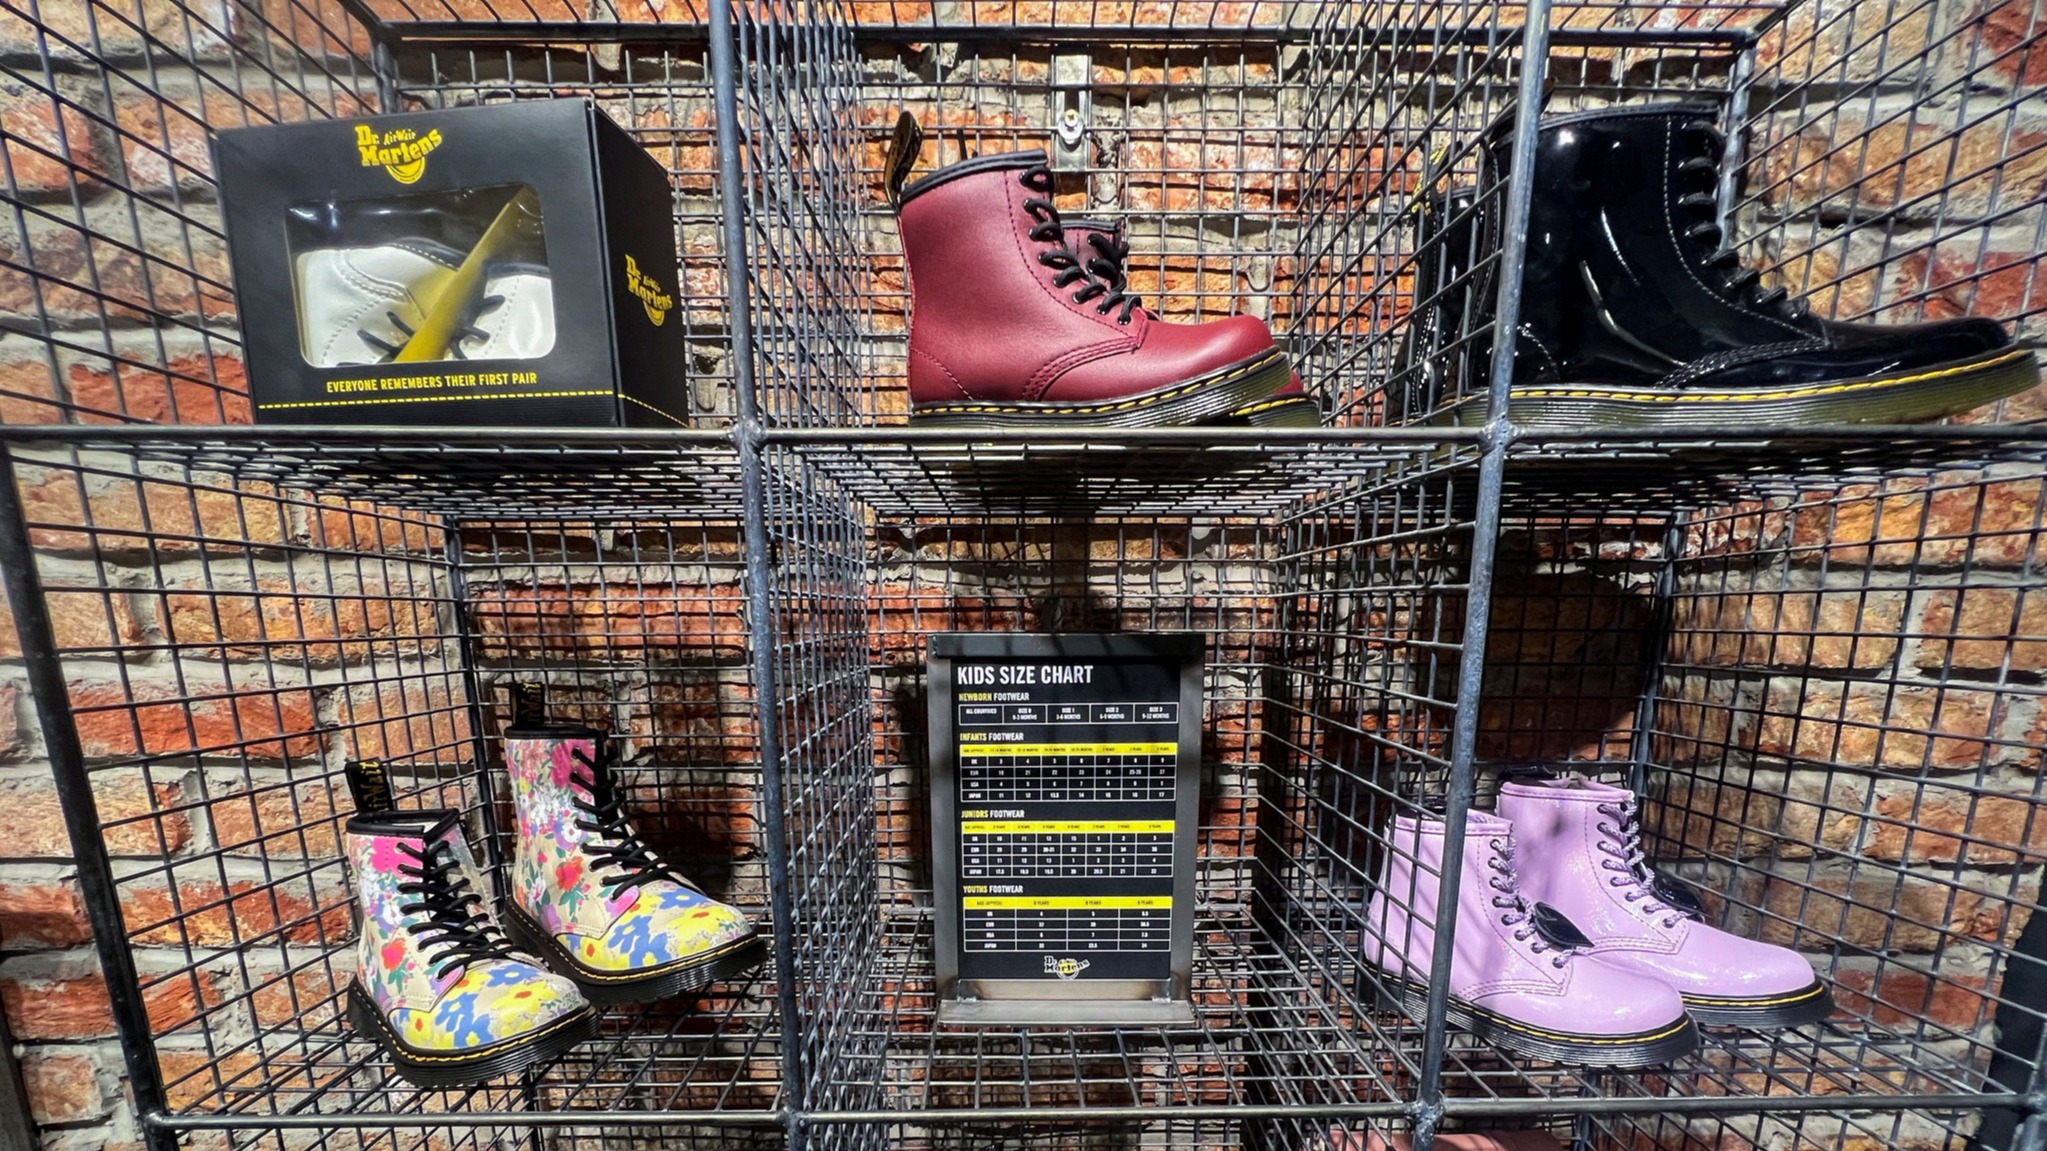 Dr Martens shares tumble as warns on margins Financial